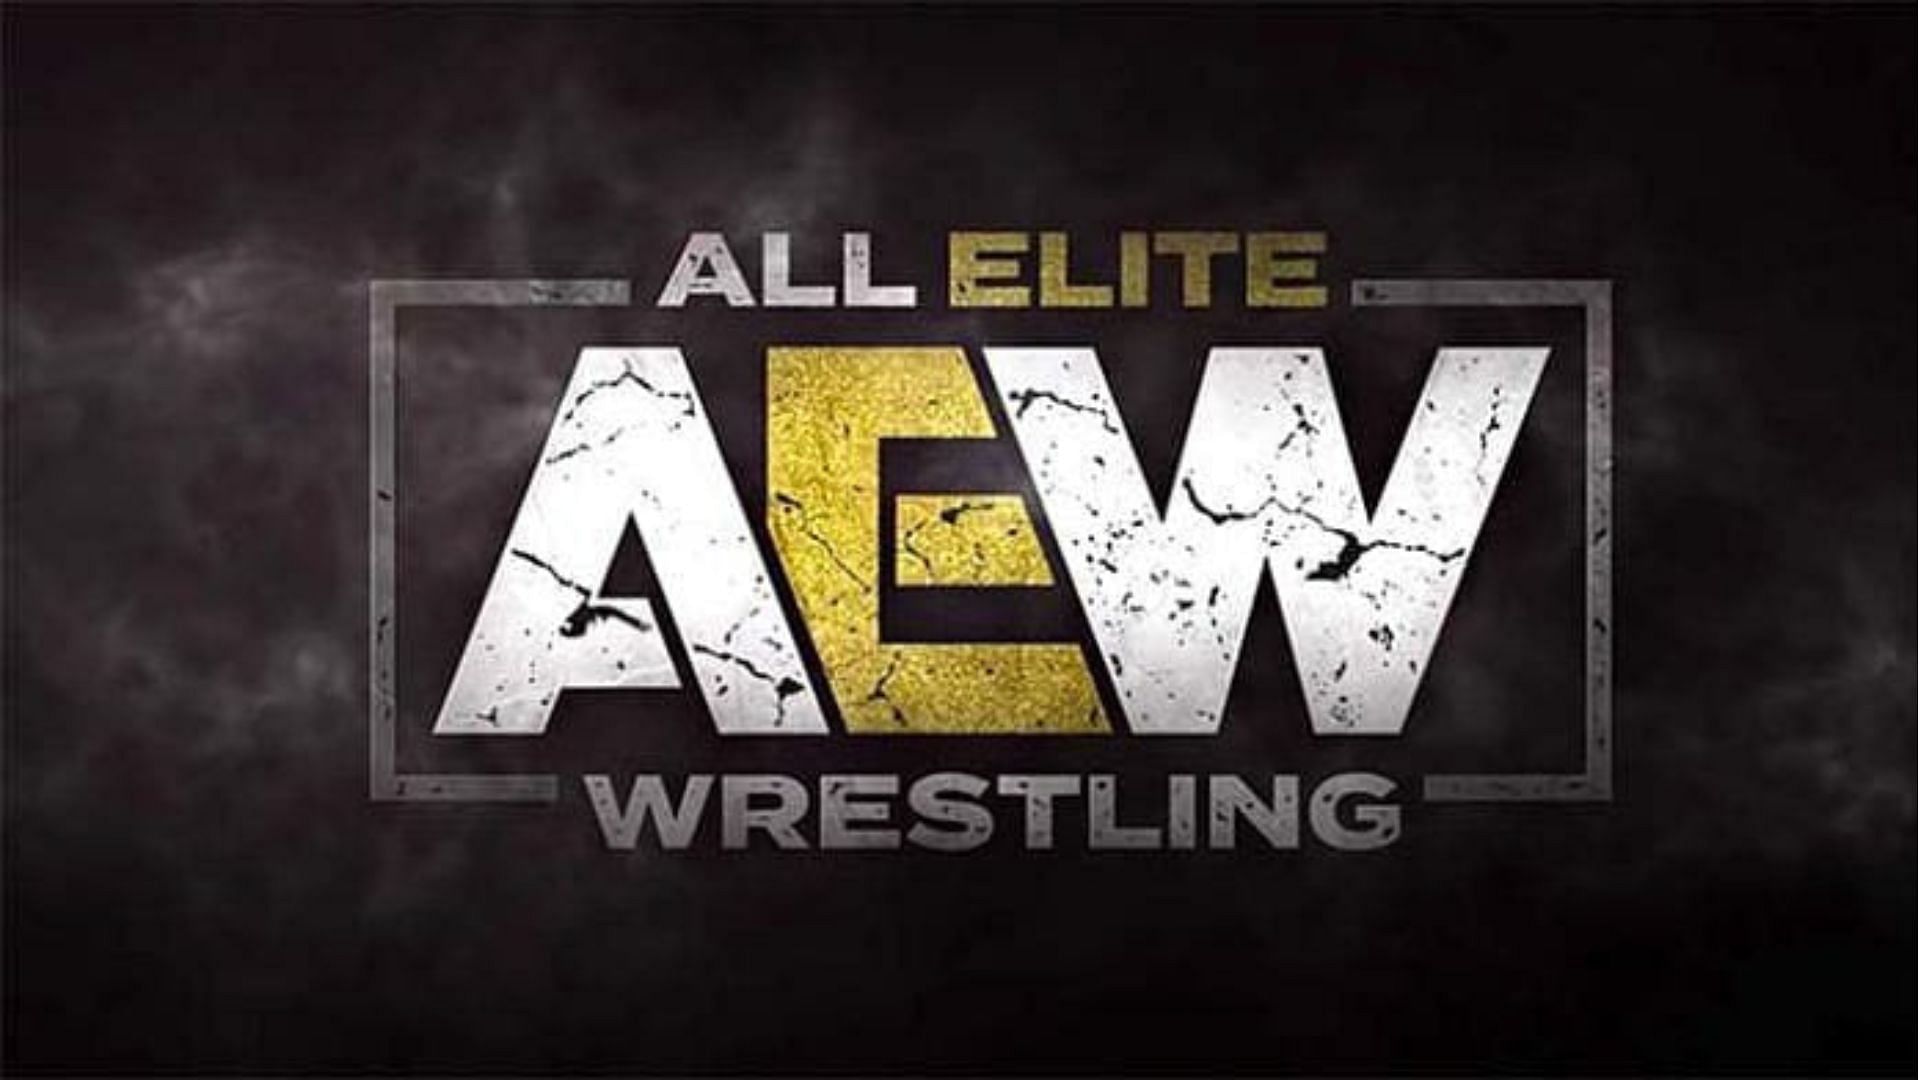 Find out which AEW star teased their return